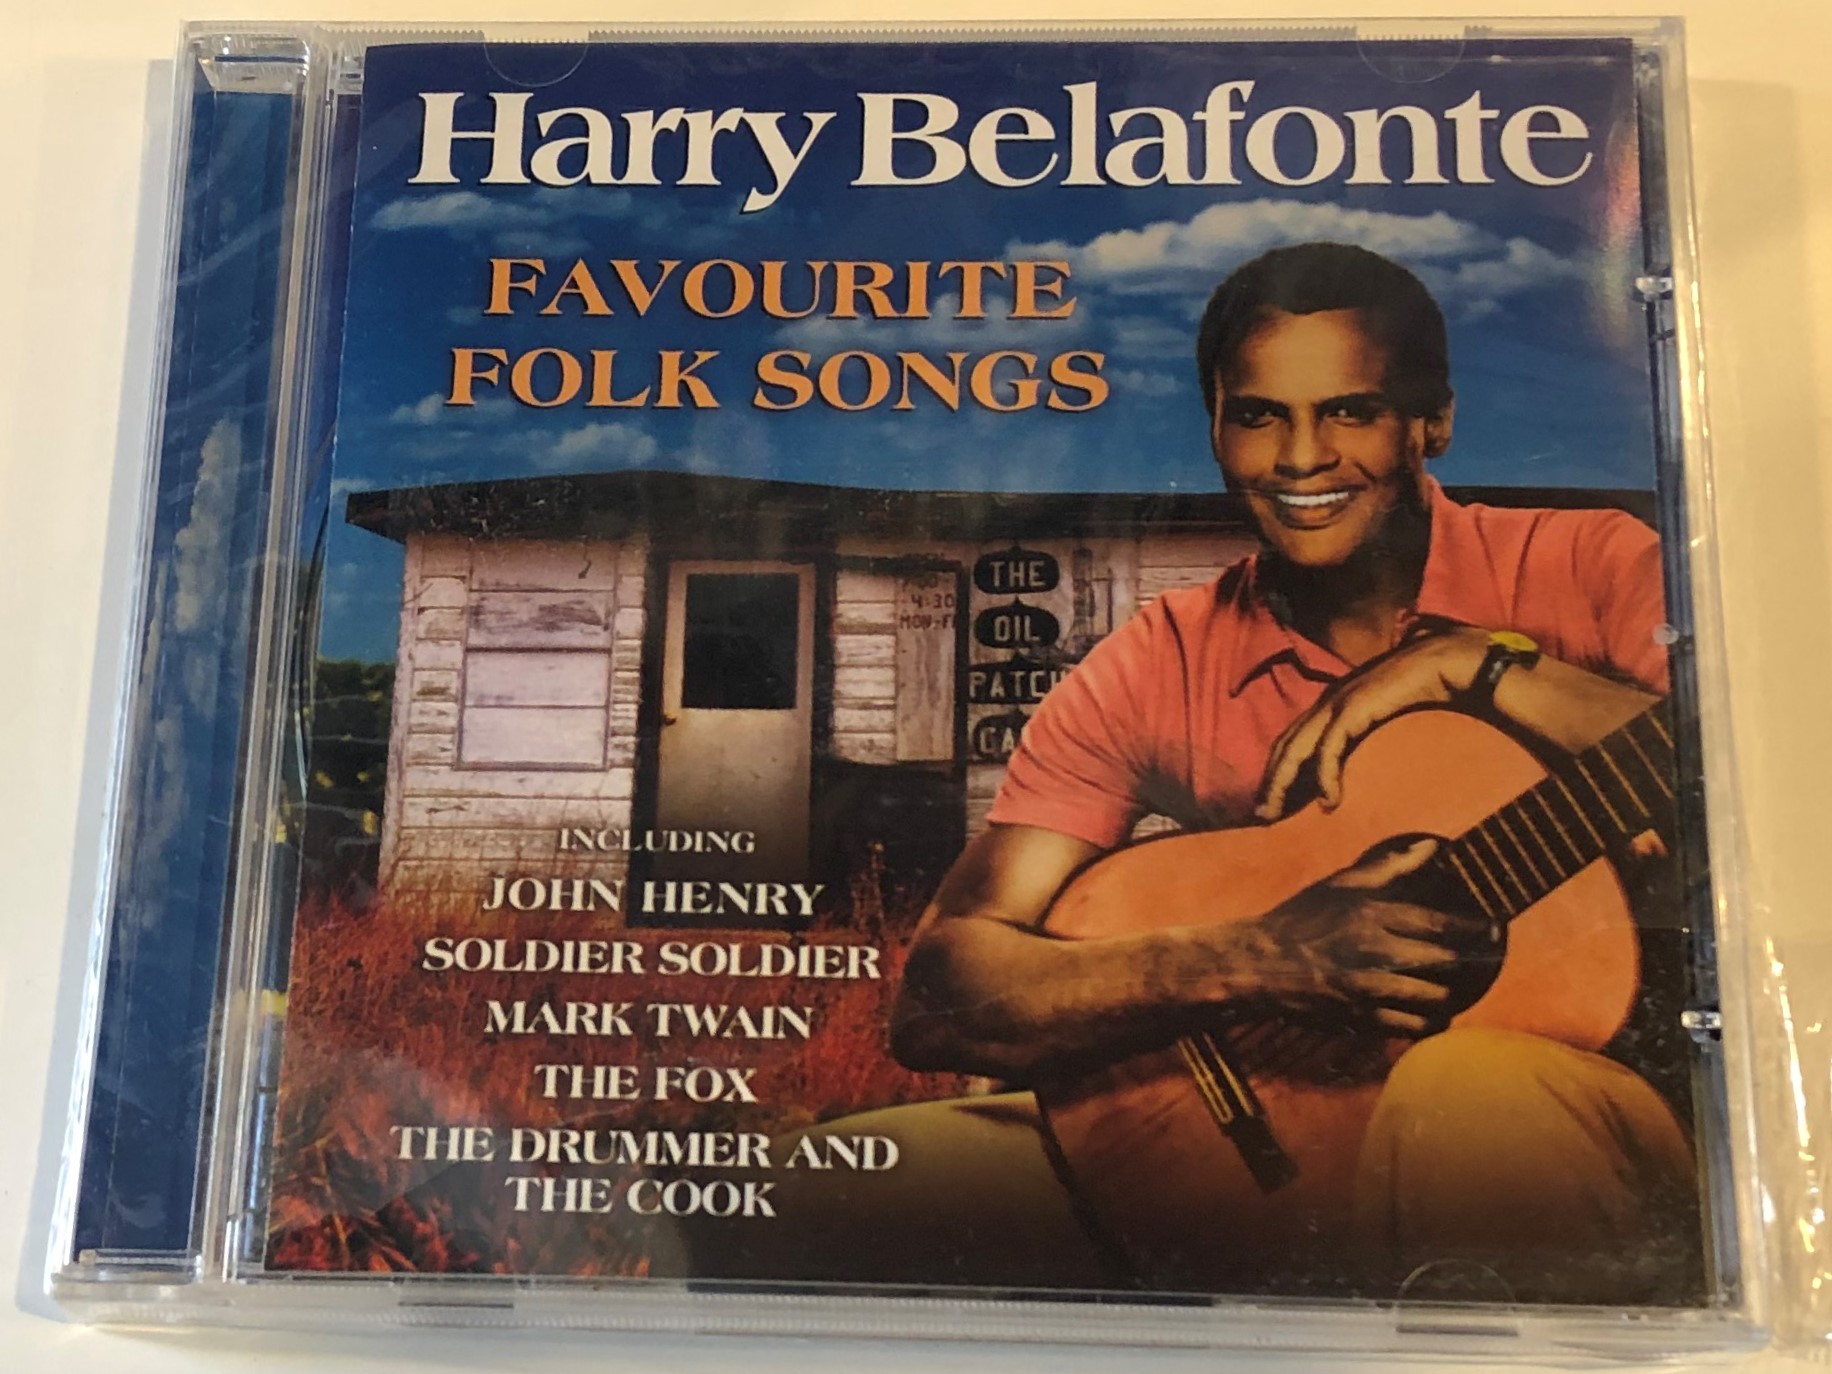 harry-belafonte-favorite-folk-songs-including-john-henry-soldier-soldier-mark-twain-the-fox-the-drummer-and-the-cook-prism-leisure-audio-cd-2004-platcd-1322-1-.jpg